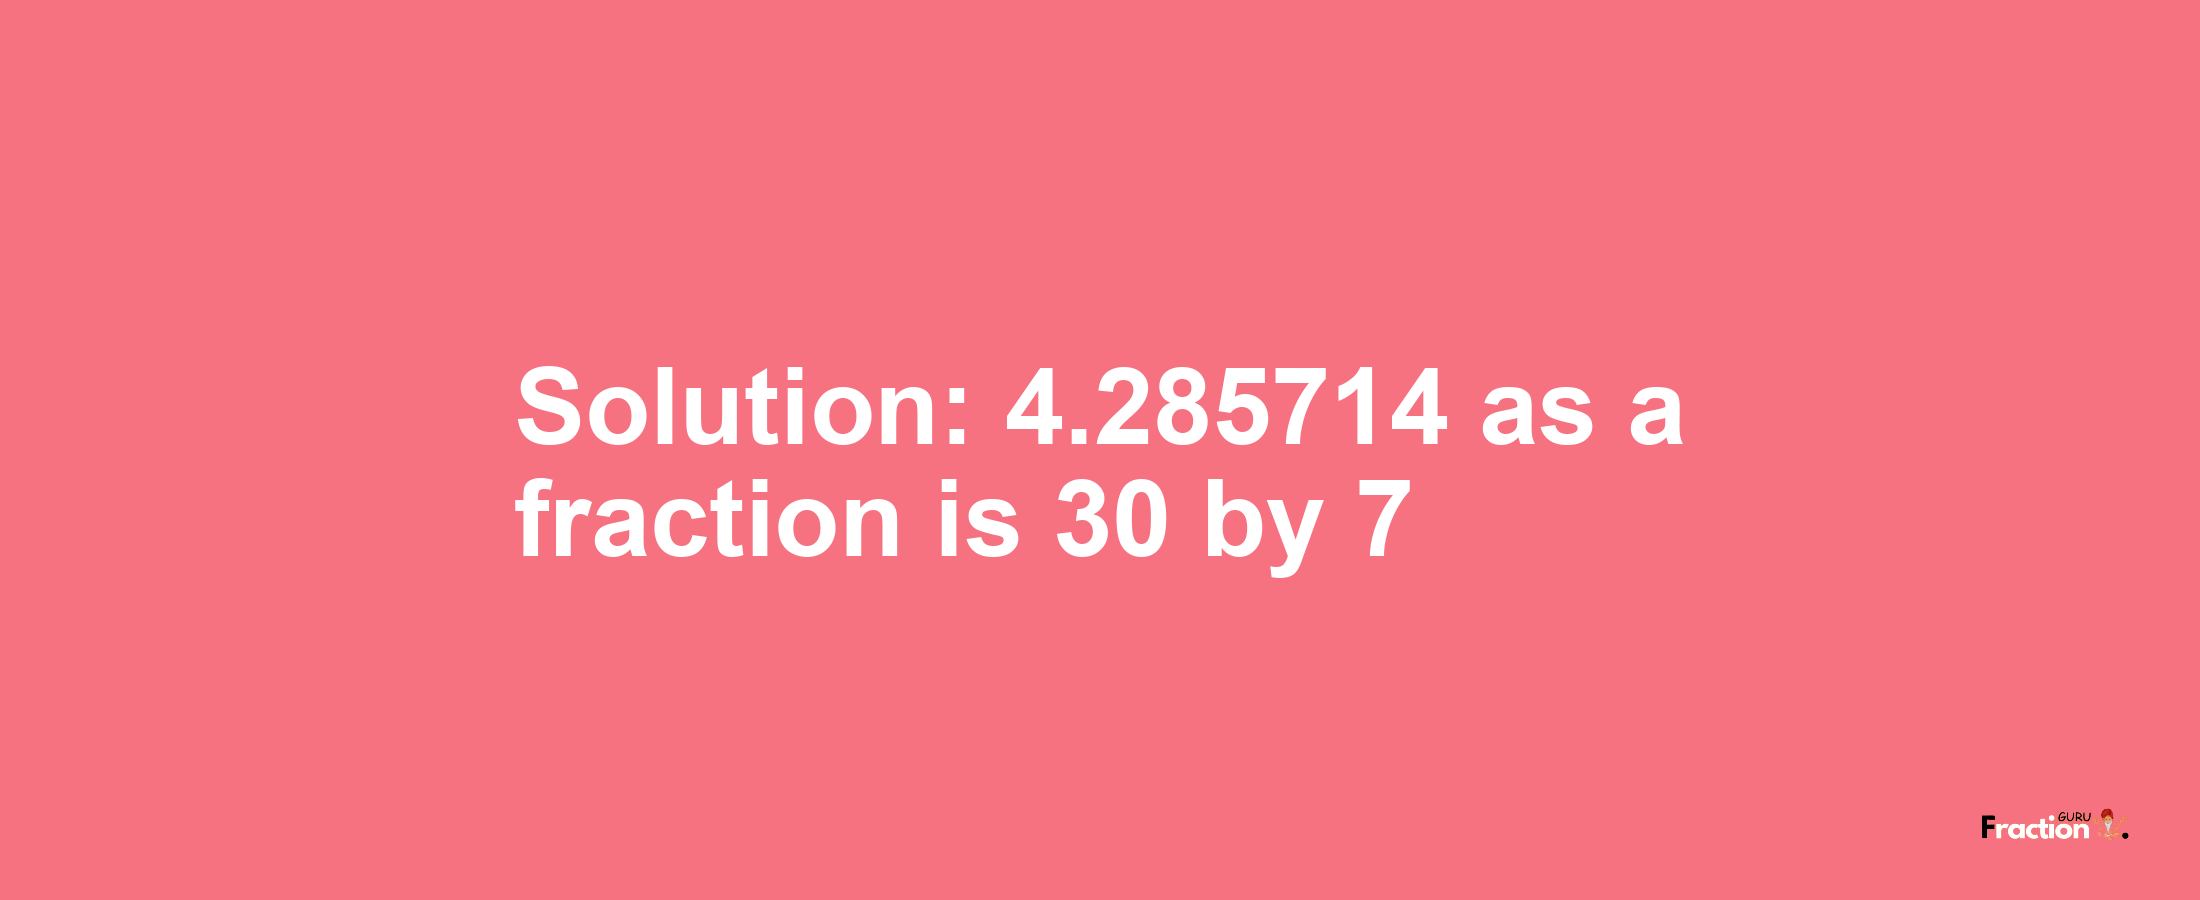 Solution:4.285714 as a fraction is 30/7